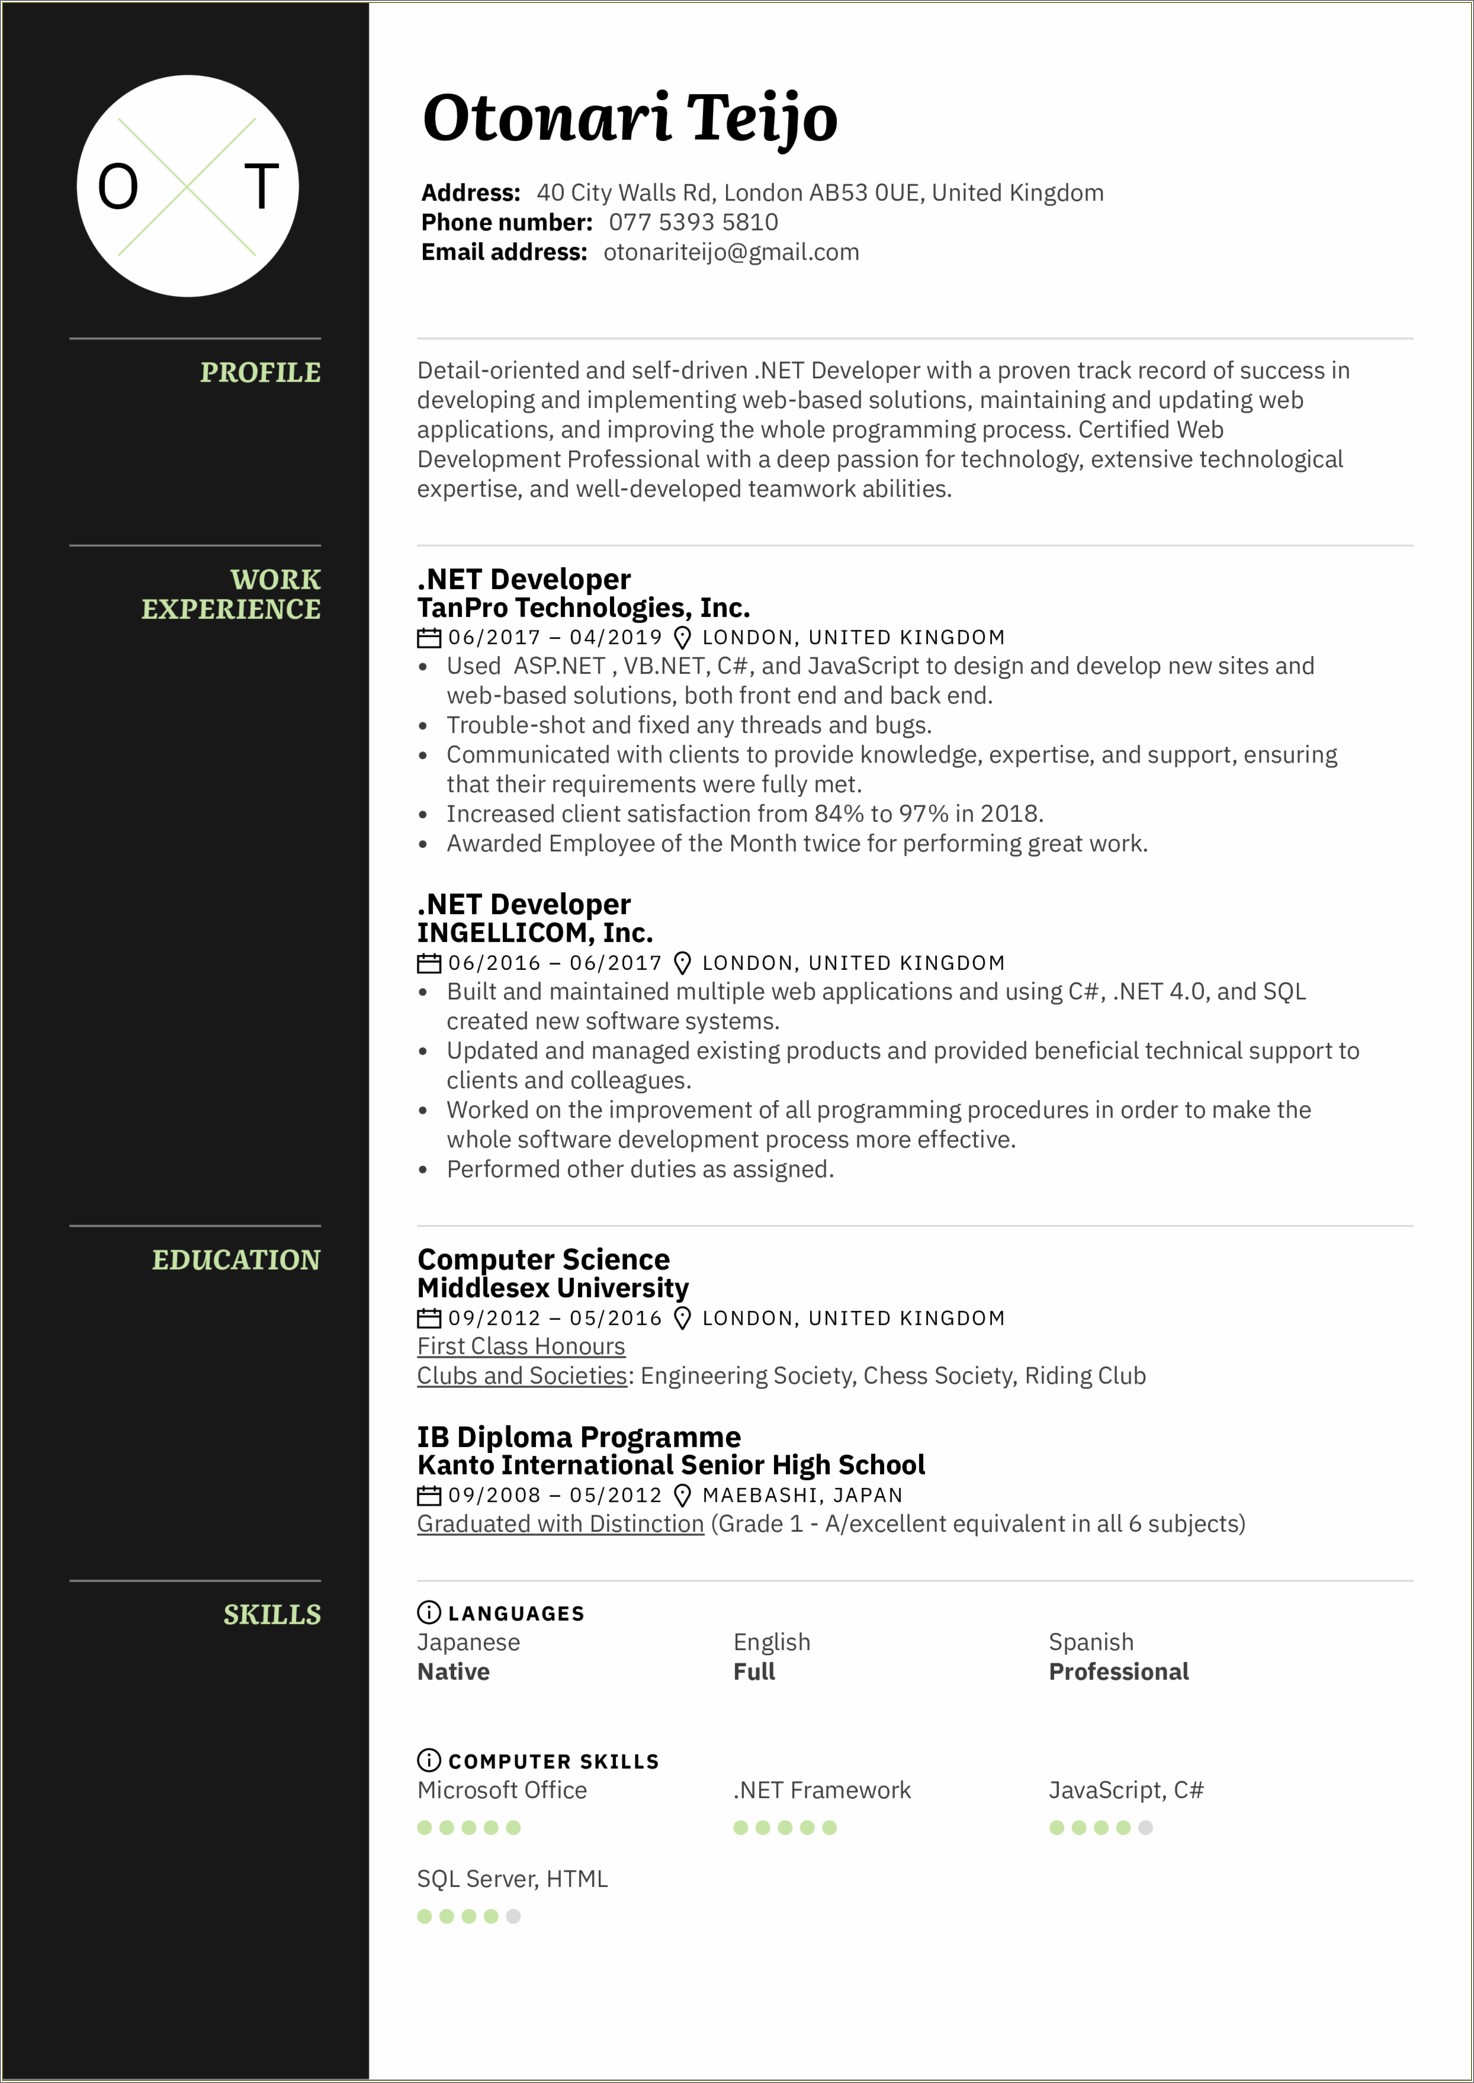 Where To Put Net In Resume